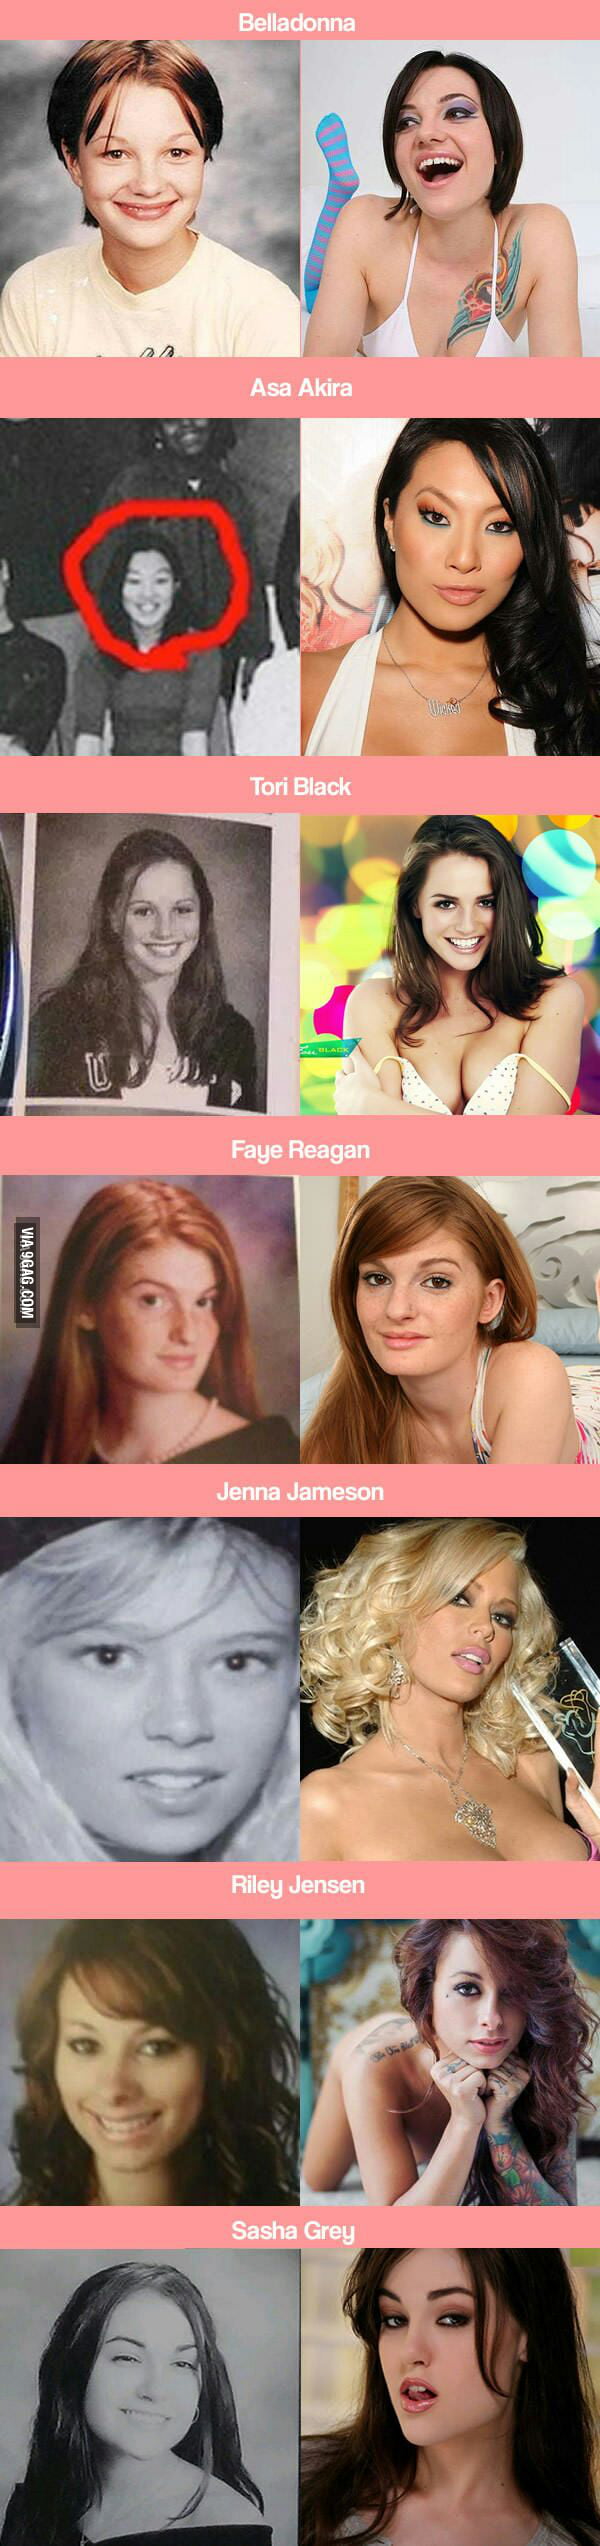 How Pornstars Looked When They Were Young And How They Look Now 9gag 